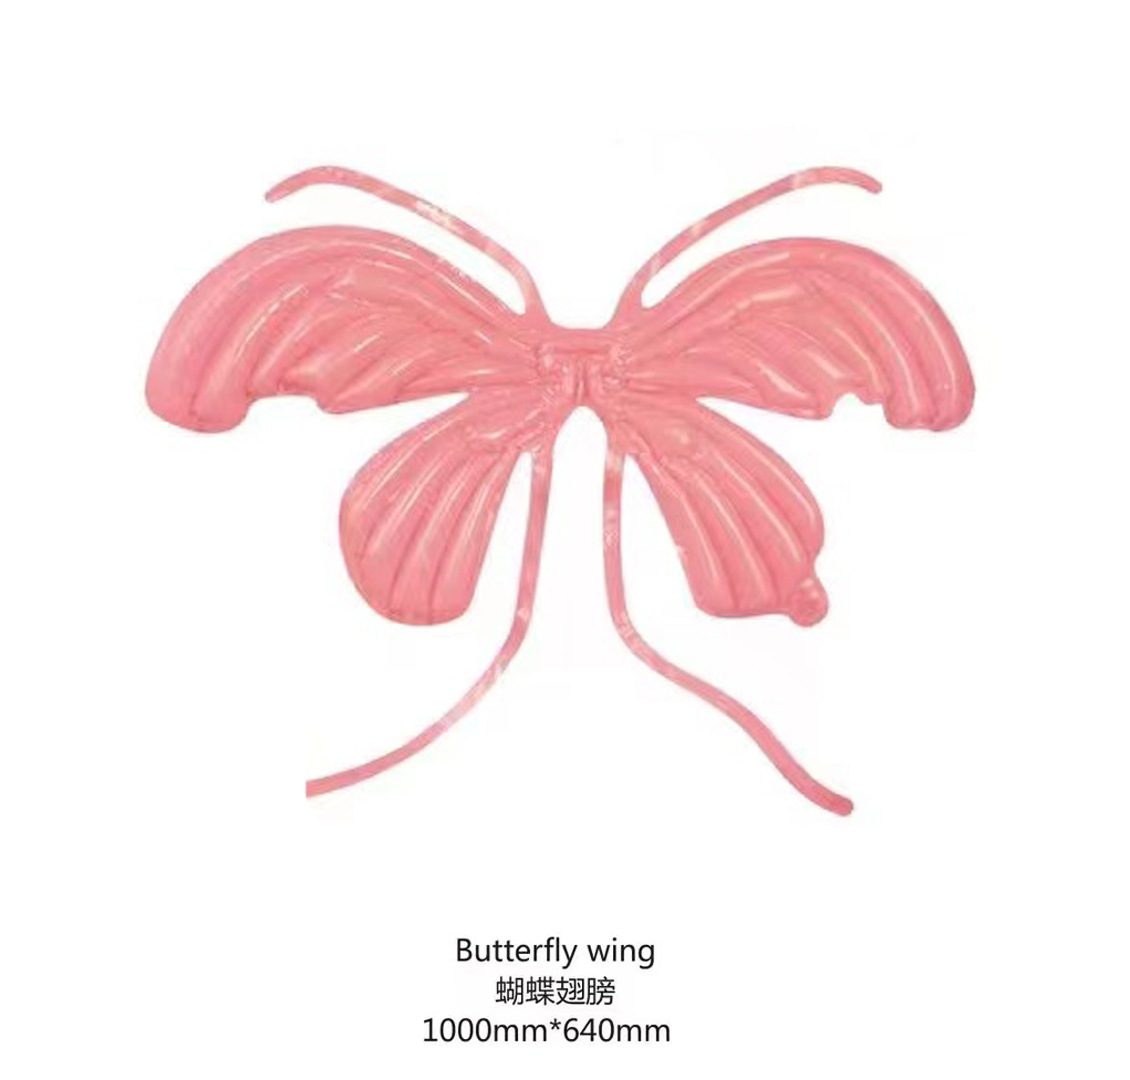 Internet Celebrity Color Angel Butterfly Wings Aluminum Balloon Mixed Batch Children's Decorative Floor Push Stall Inflatable Steam